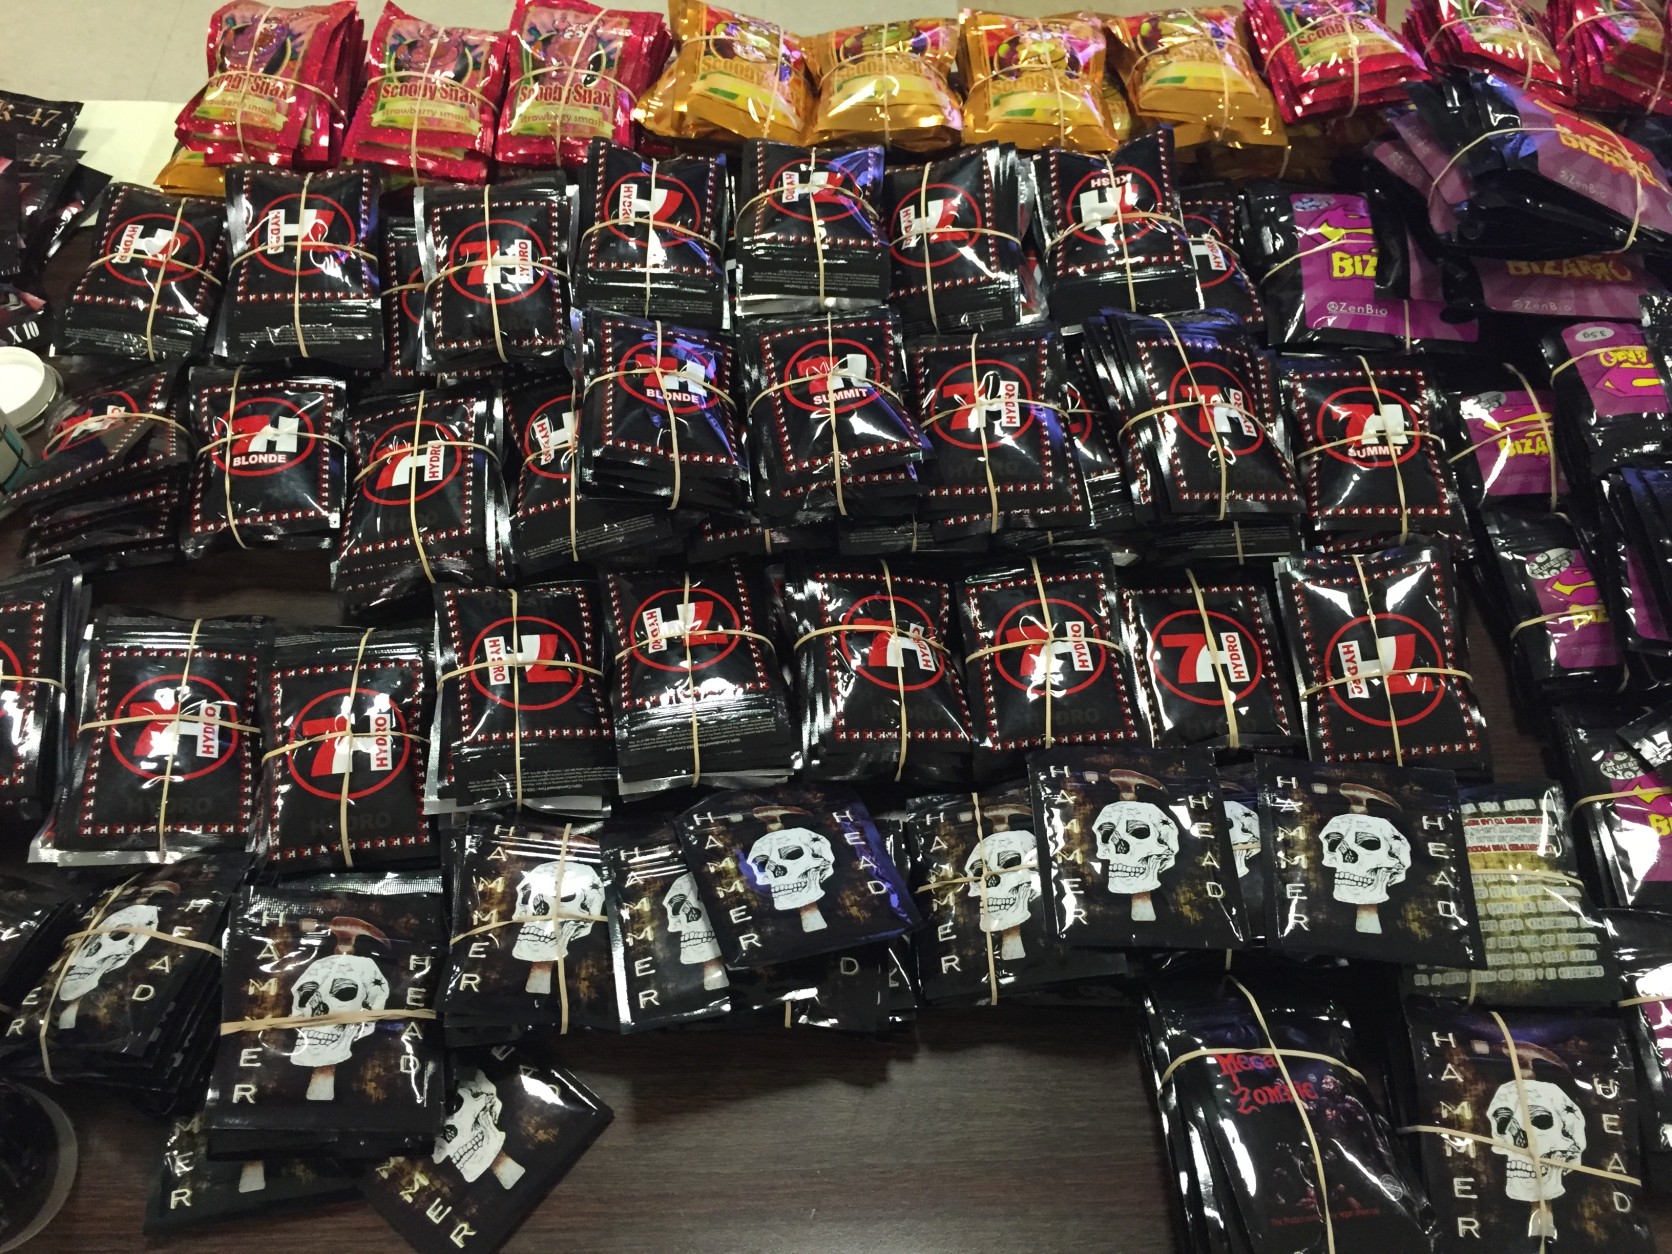 Prince George's County police announced Friday that in one week they seized nearly 1,700 packs of synthetic drugs. (WTOP/Andrew Mollenbeck)